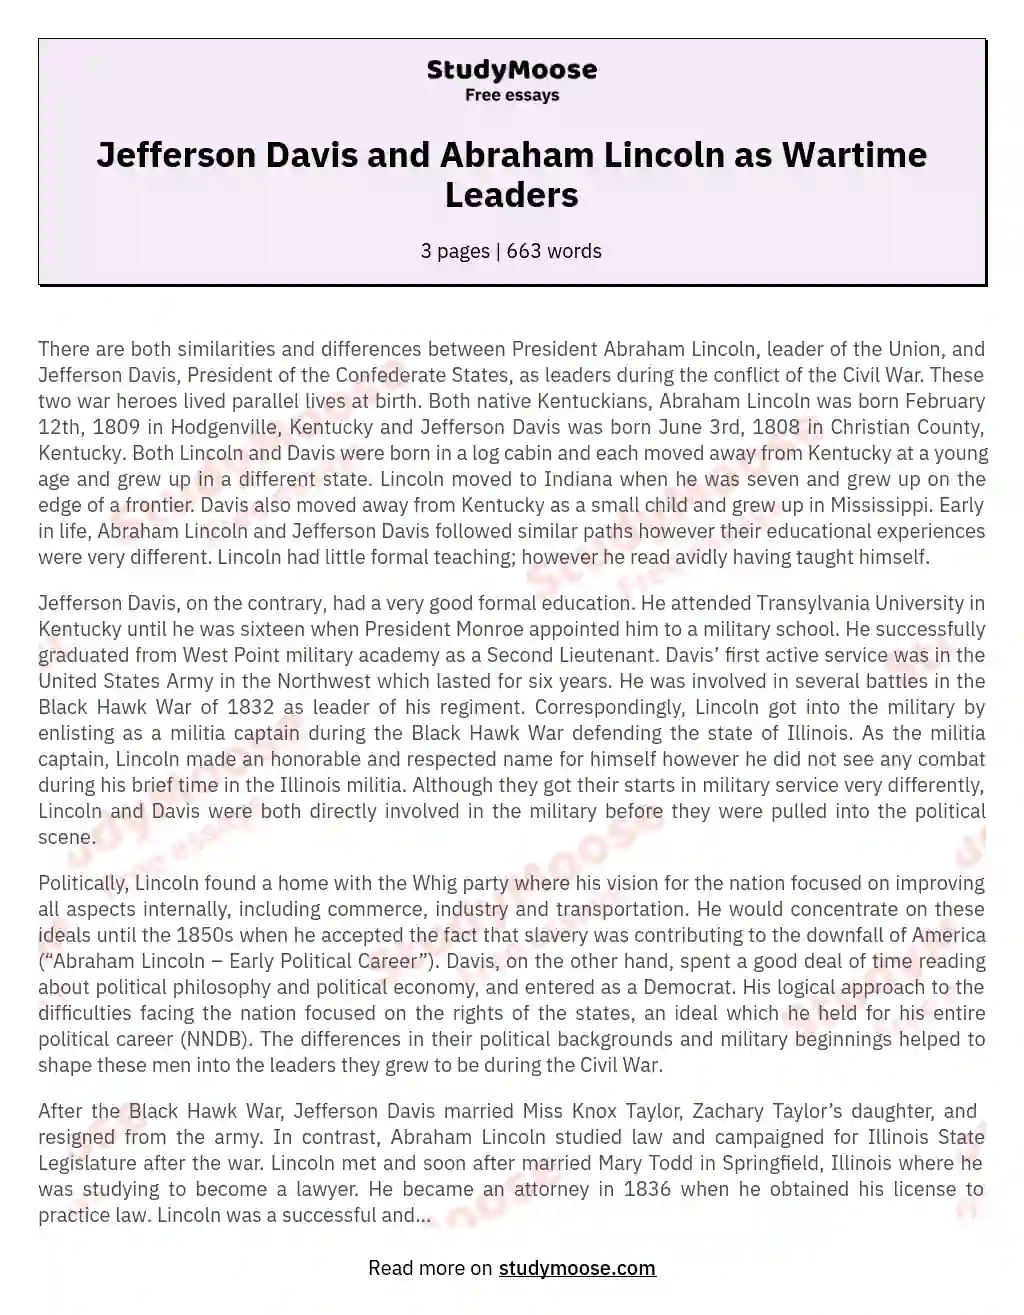 Jefferson Davis and Abraham Lincoln as Wartime Leaders essay